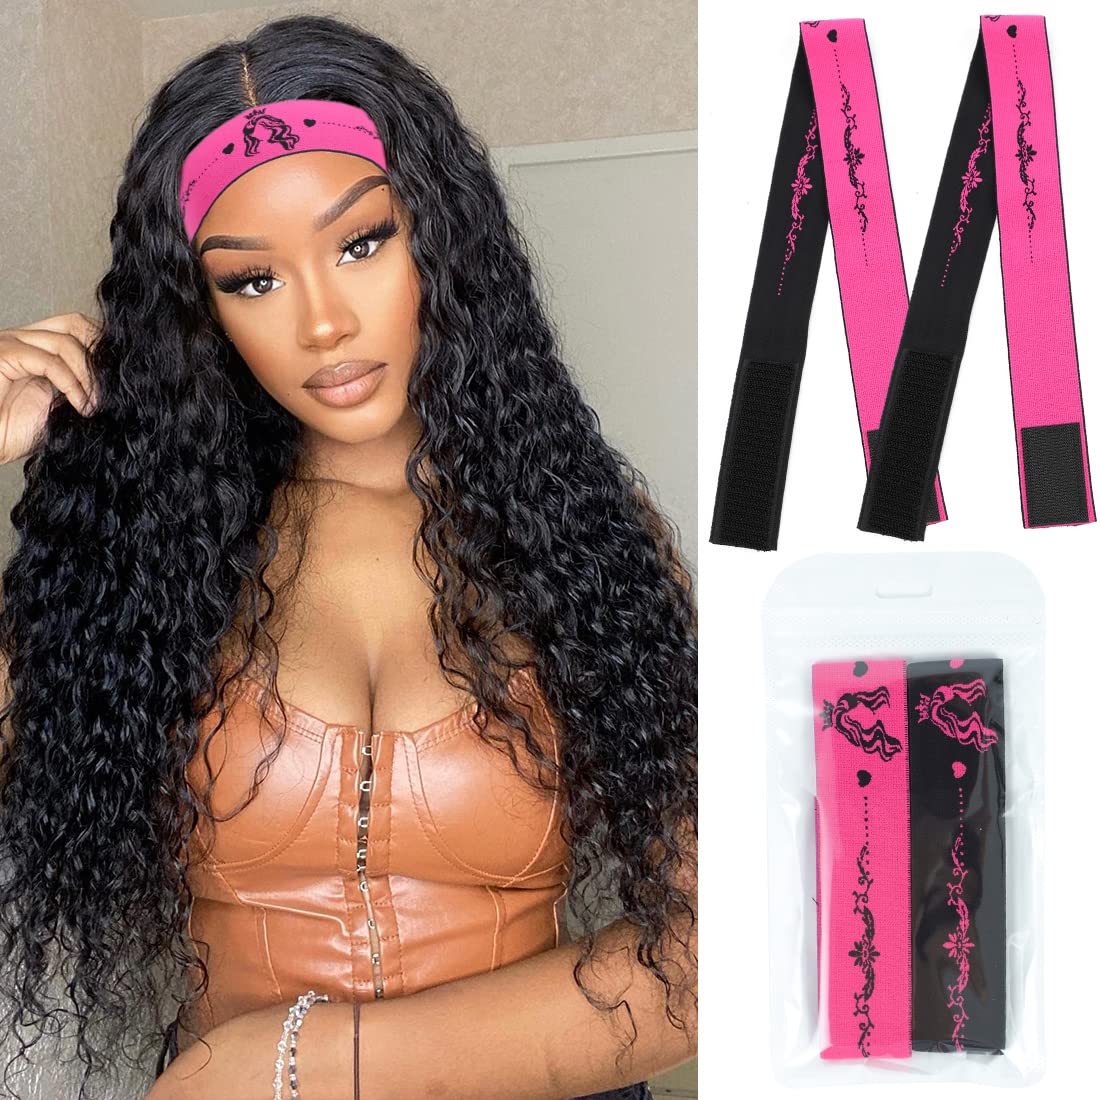 Elastic Band For Lace Frontal Melt Lace Melting Band For Lace Wigs Wig  Elastic Band For Melting Lace Adjustable Wig Band For Edges Lace Band Wig  Bands For Edges Elastic Edge Wrap